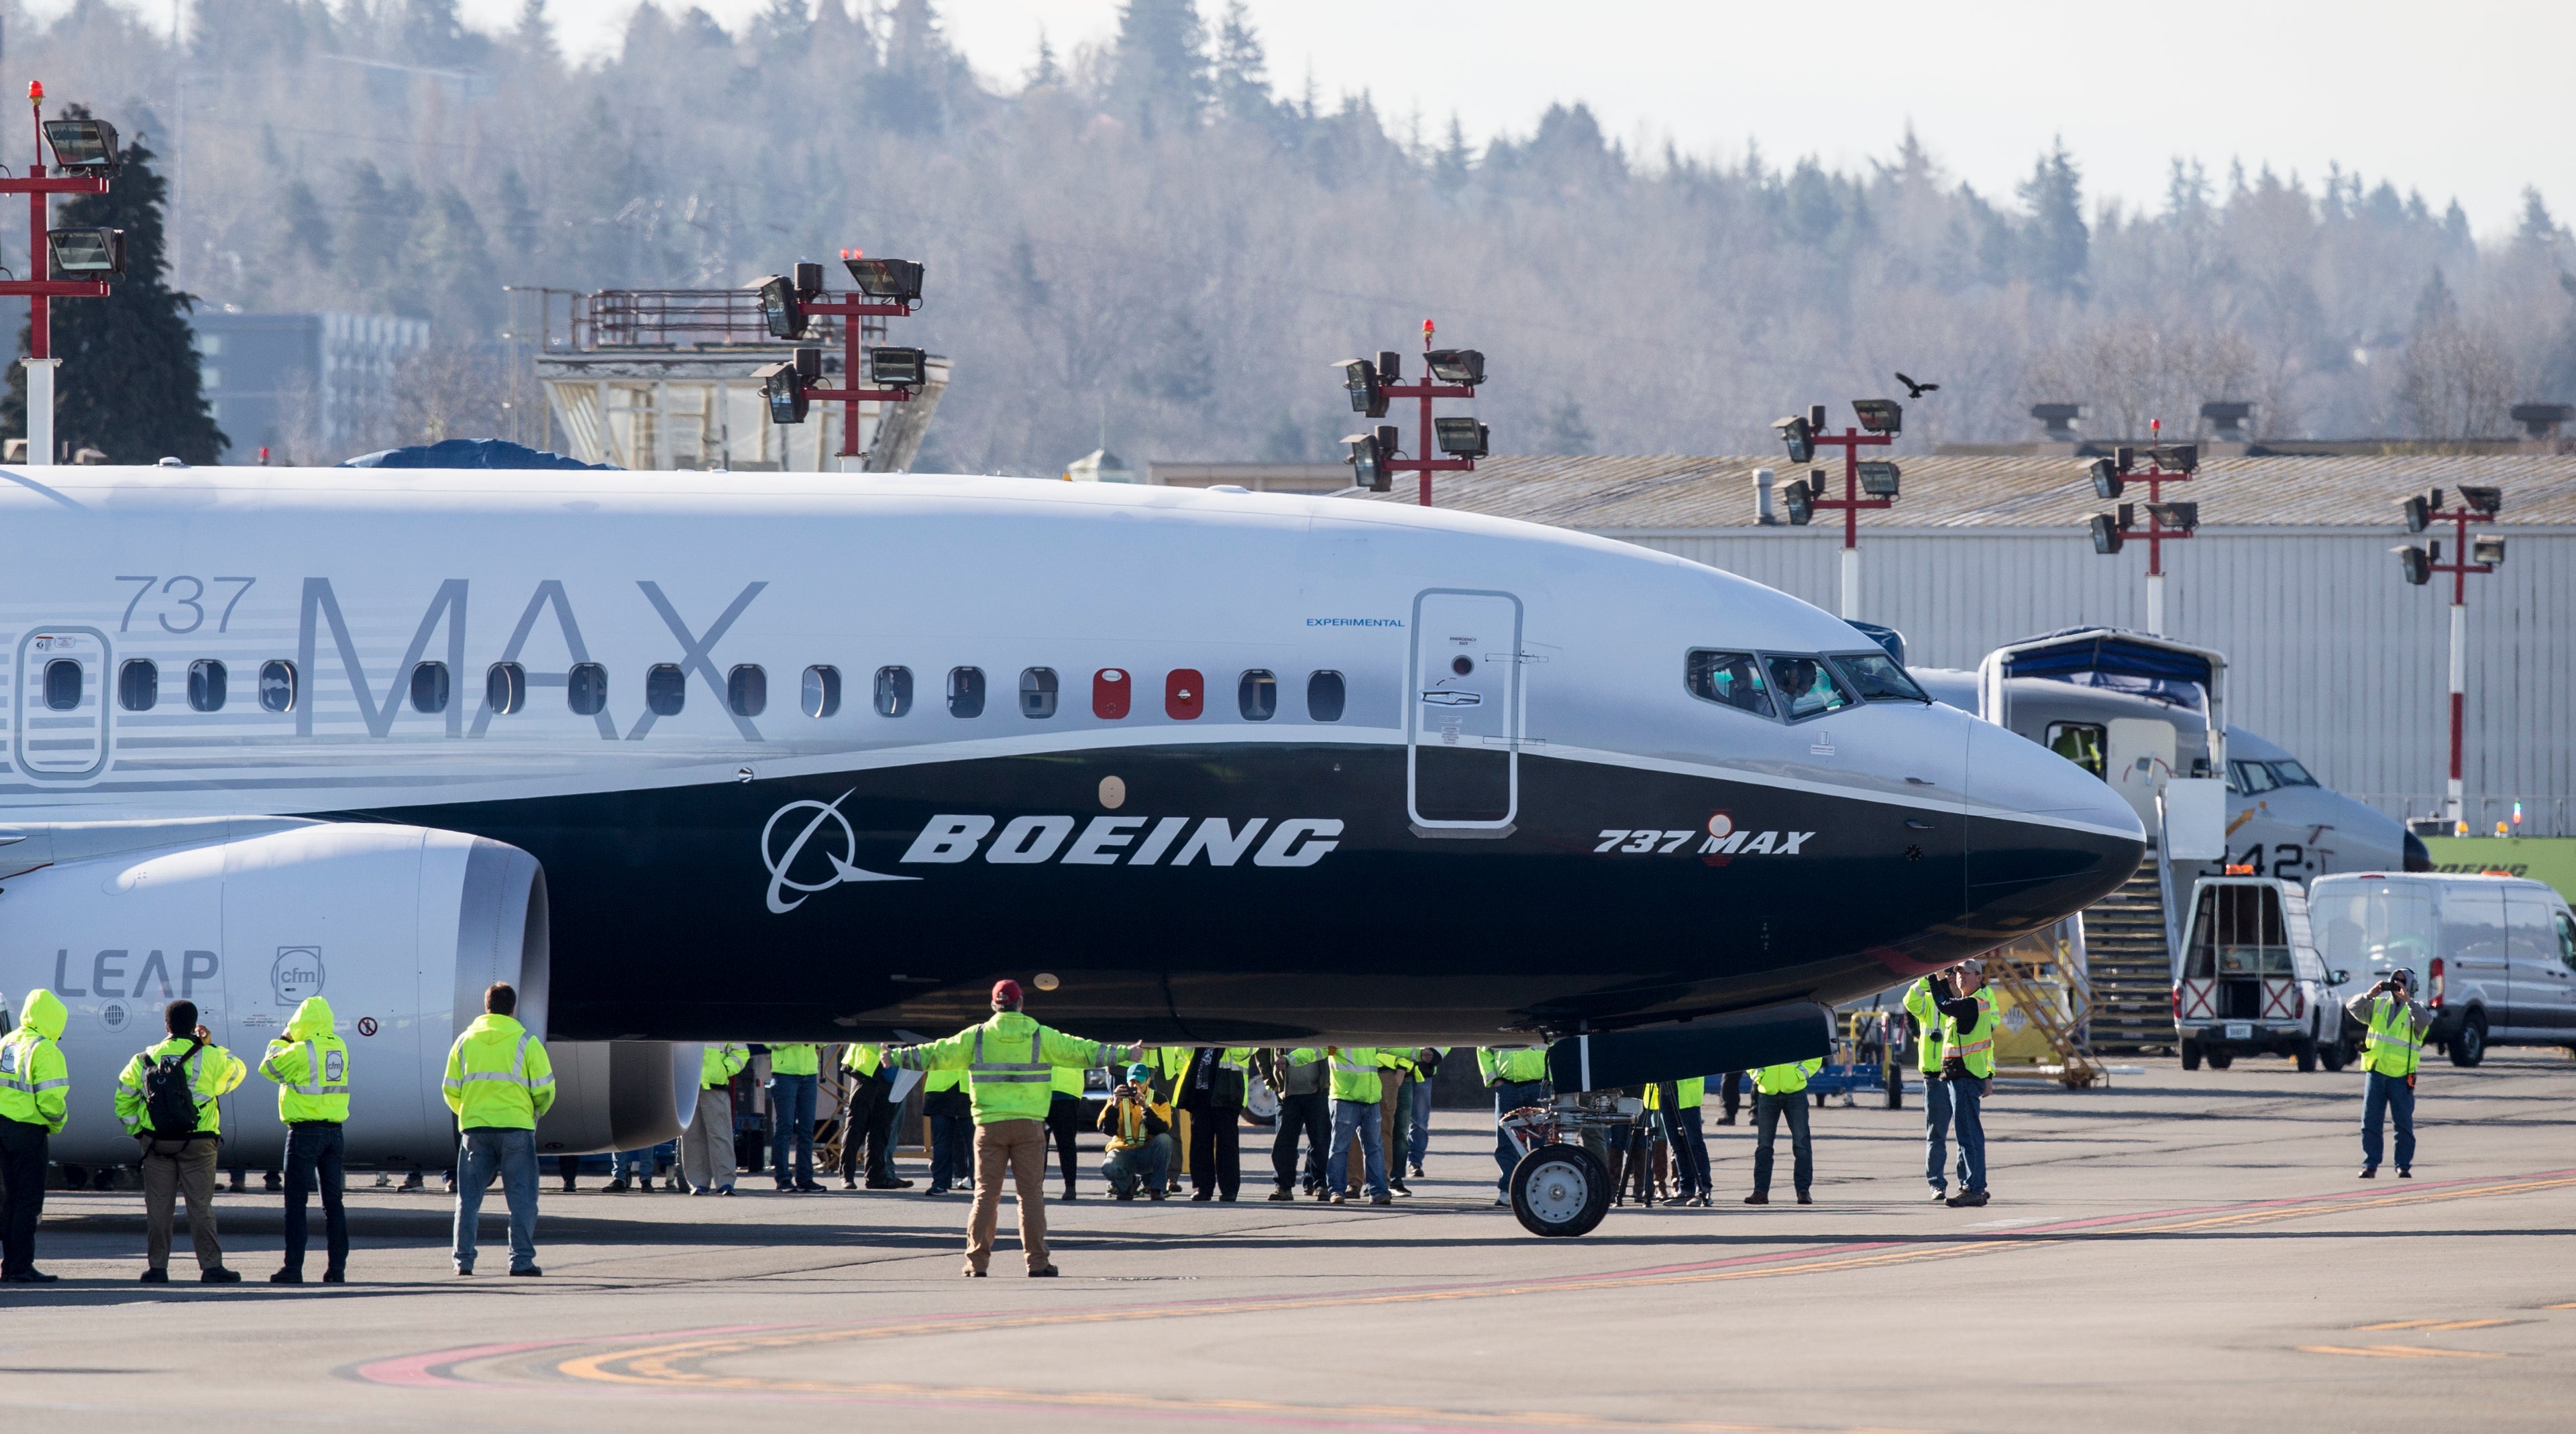 Latest Version Of Boeing's 737 MAX, The 737 Max 7 Is Tested During First Flight